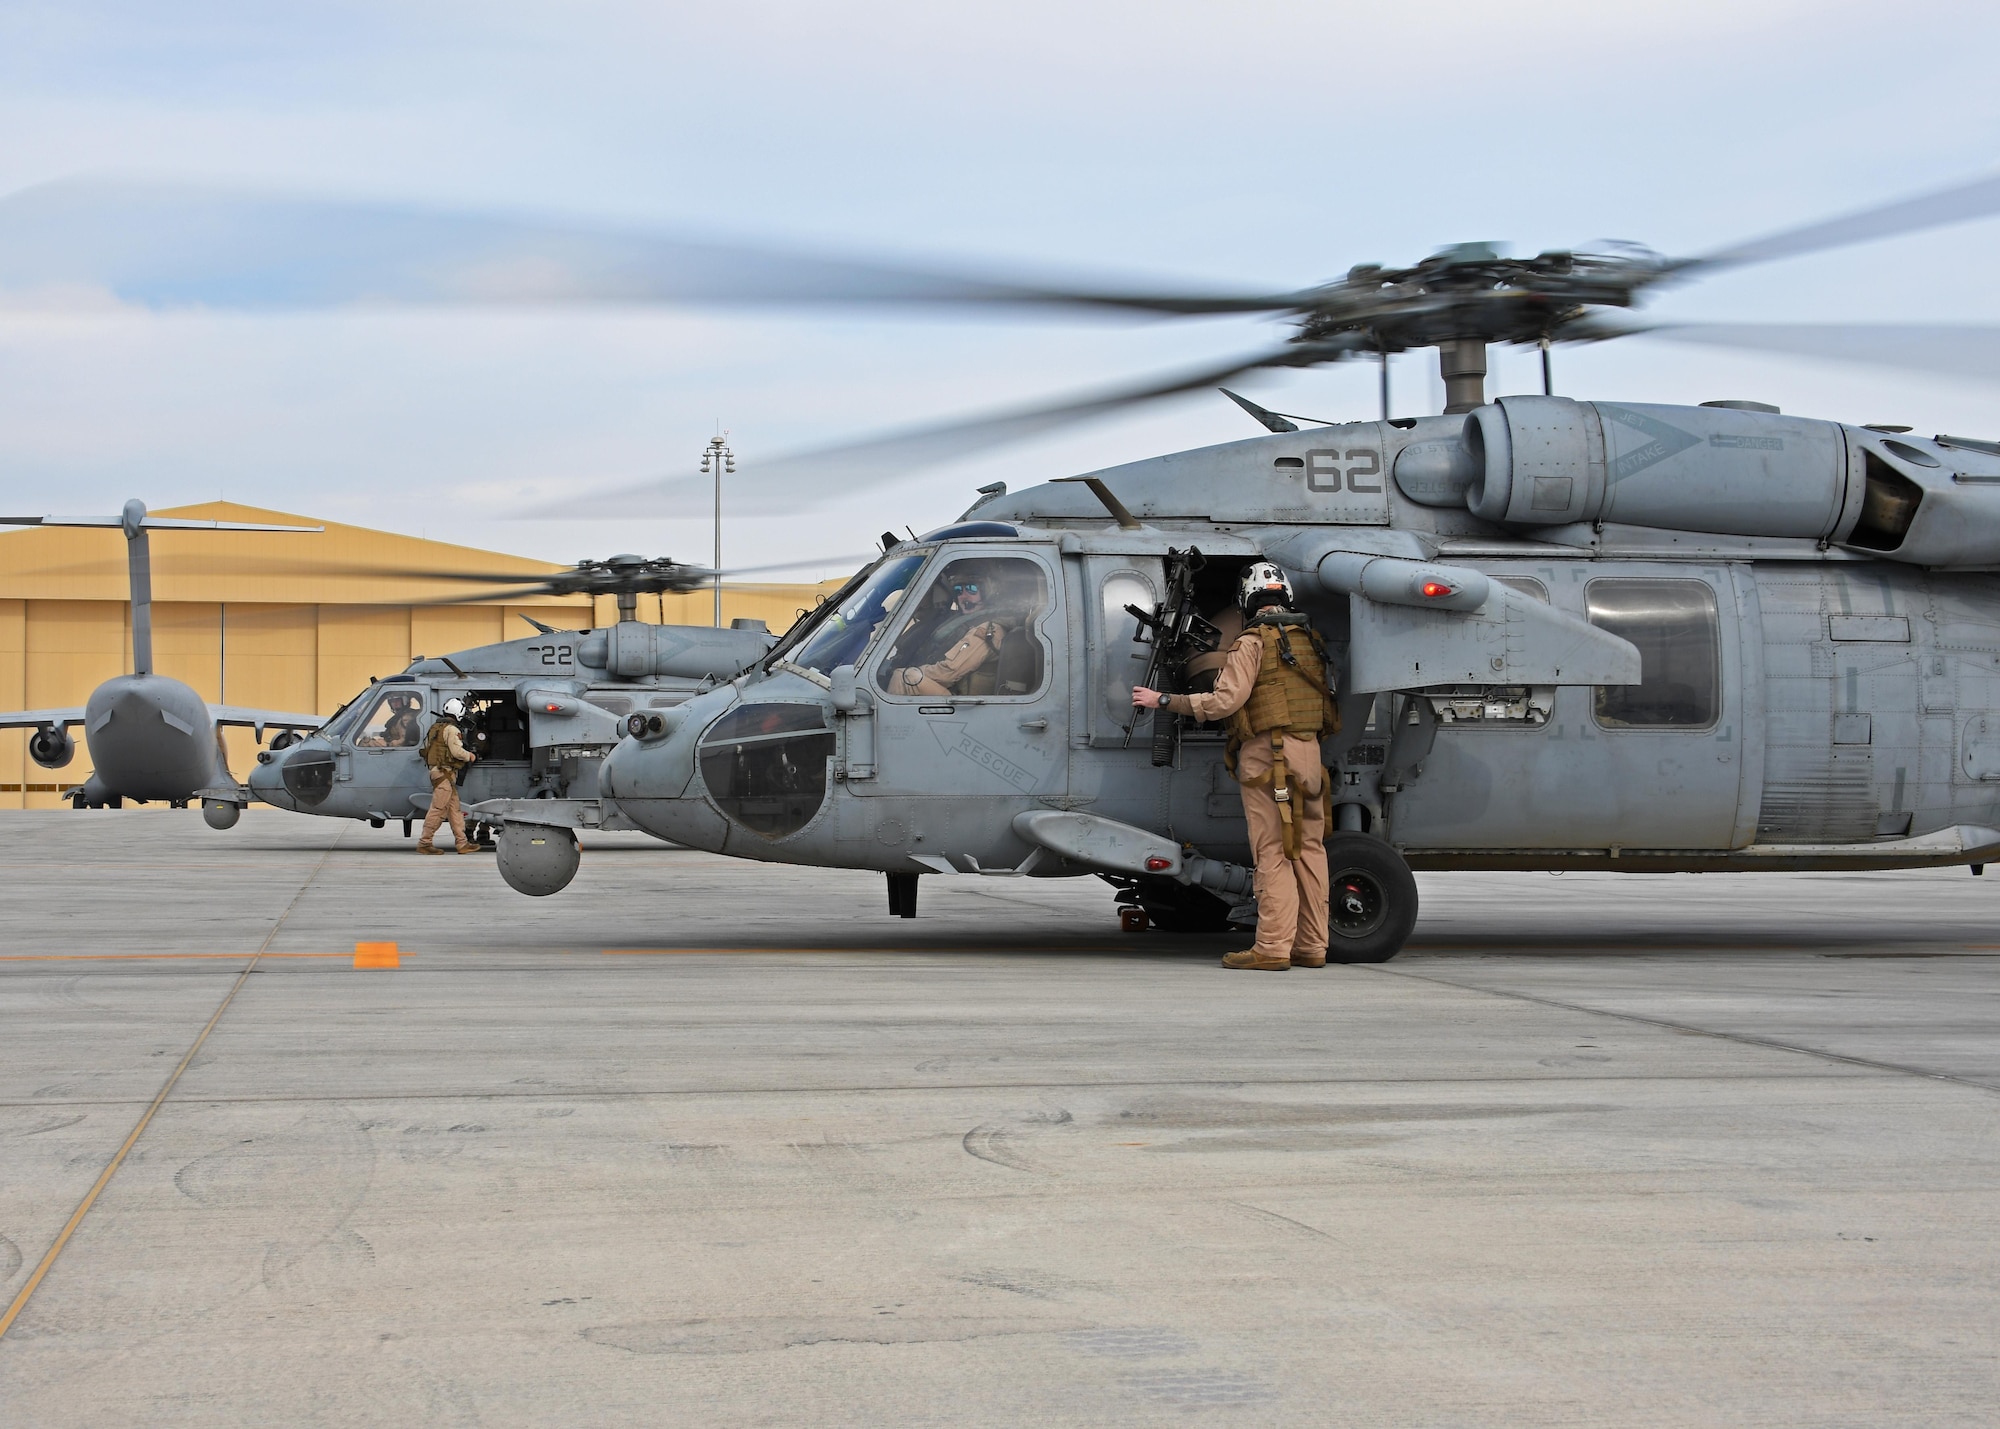 Two U.S. Navy MH-60 Seahawks prepare to takeoff from Al Udeid Air Base, Qatar, Jan. 23, 2017. The helicopters were loaded with medical personnel with the 379th Expeditionary Medical Operations Squadron mobile field surgical and expeditionary critical care teams who were being transported to the HMS Ocean, a Royal Navy ship currently deployed within the Mediterranean, for a coalition medical exercise. (U.S. Air Force photo by Senior Airman Miles Wilson)